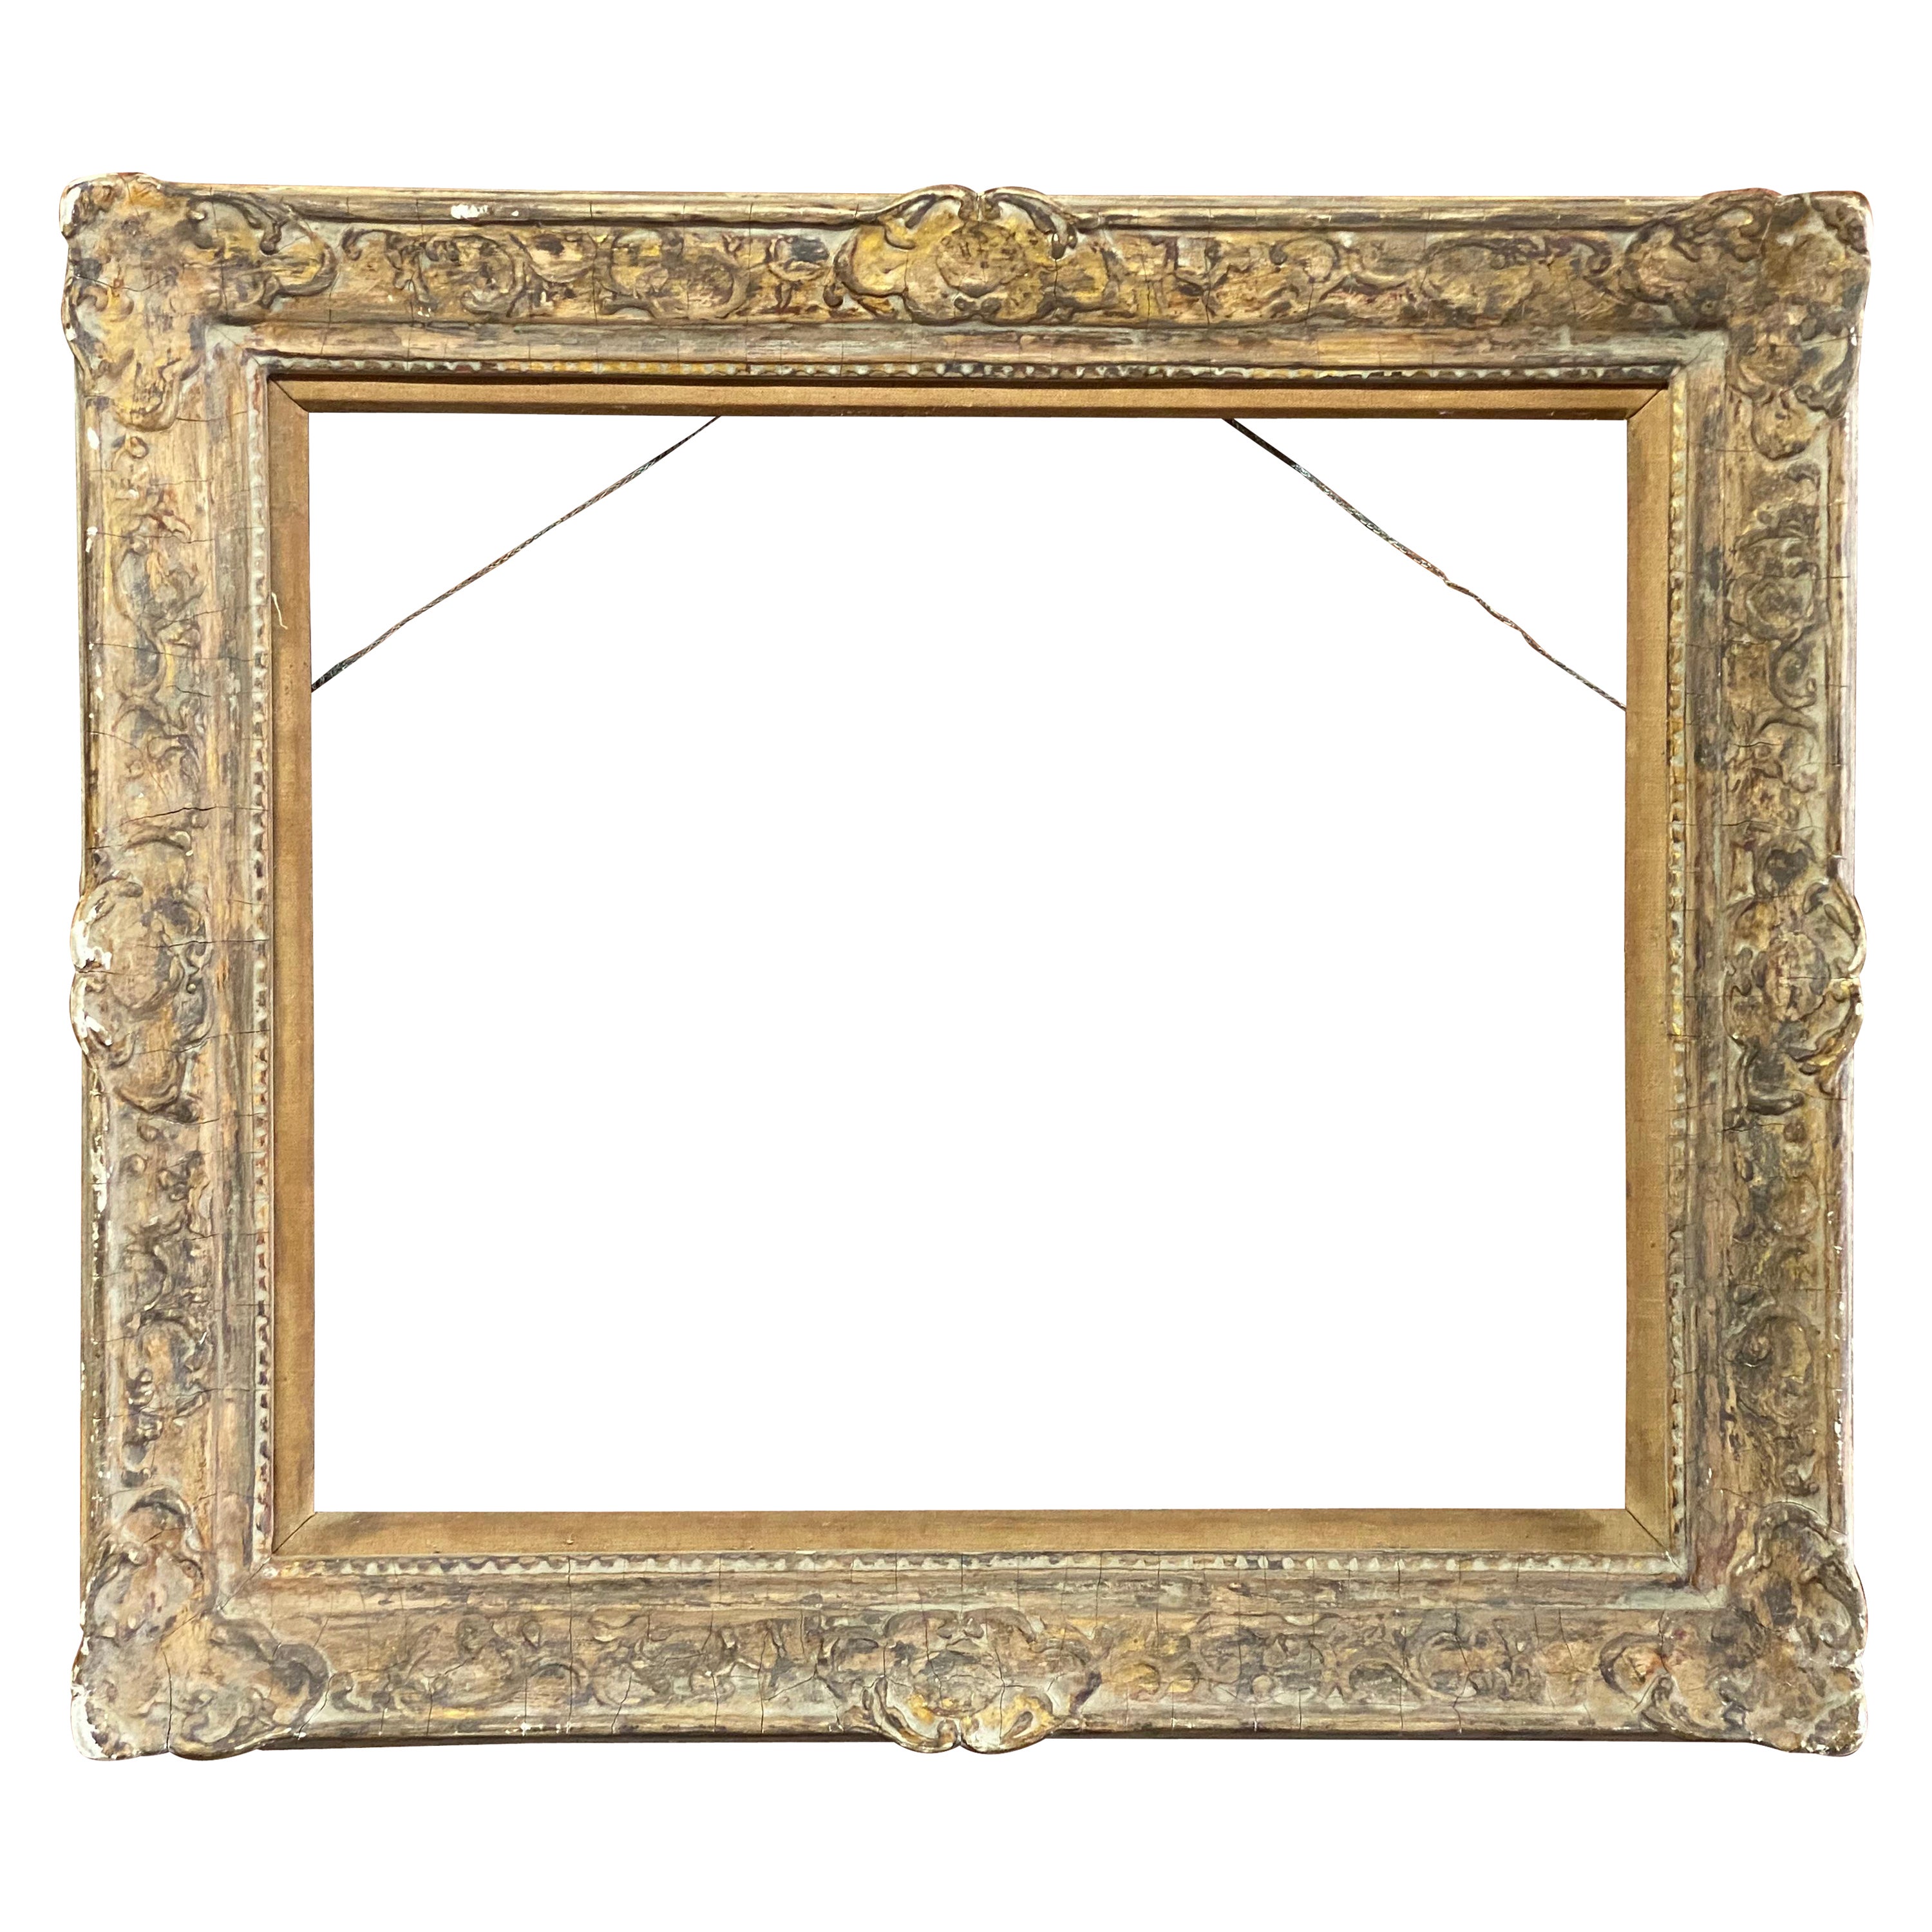 Newcomb-Macklin Beaux Arts Style Carved and Gesso Frame